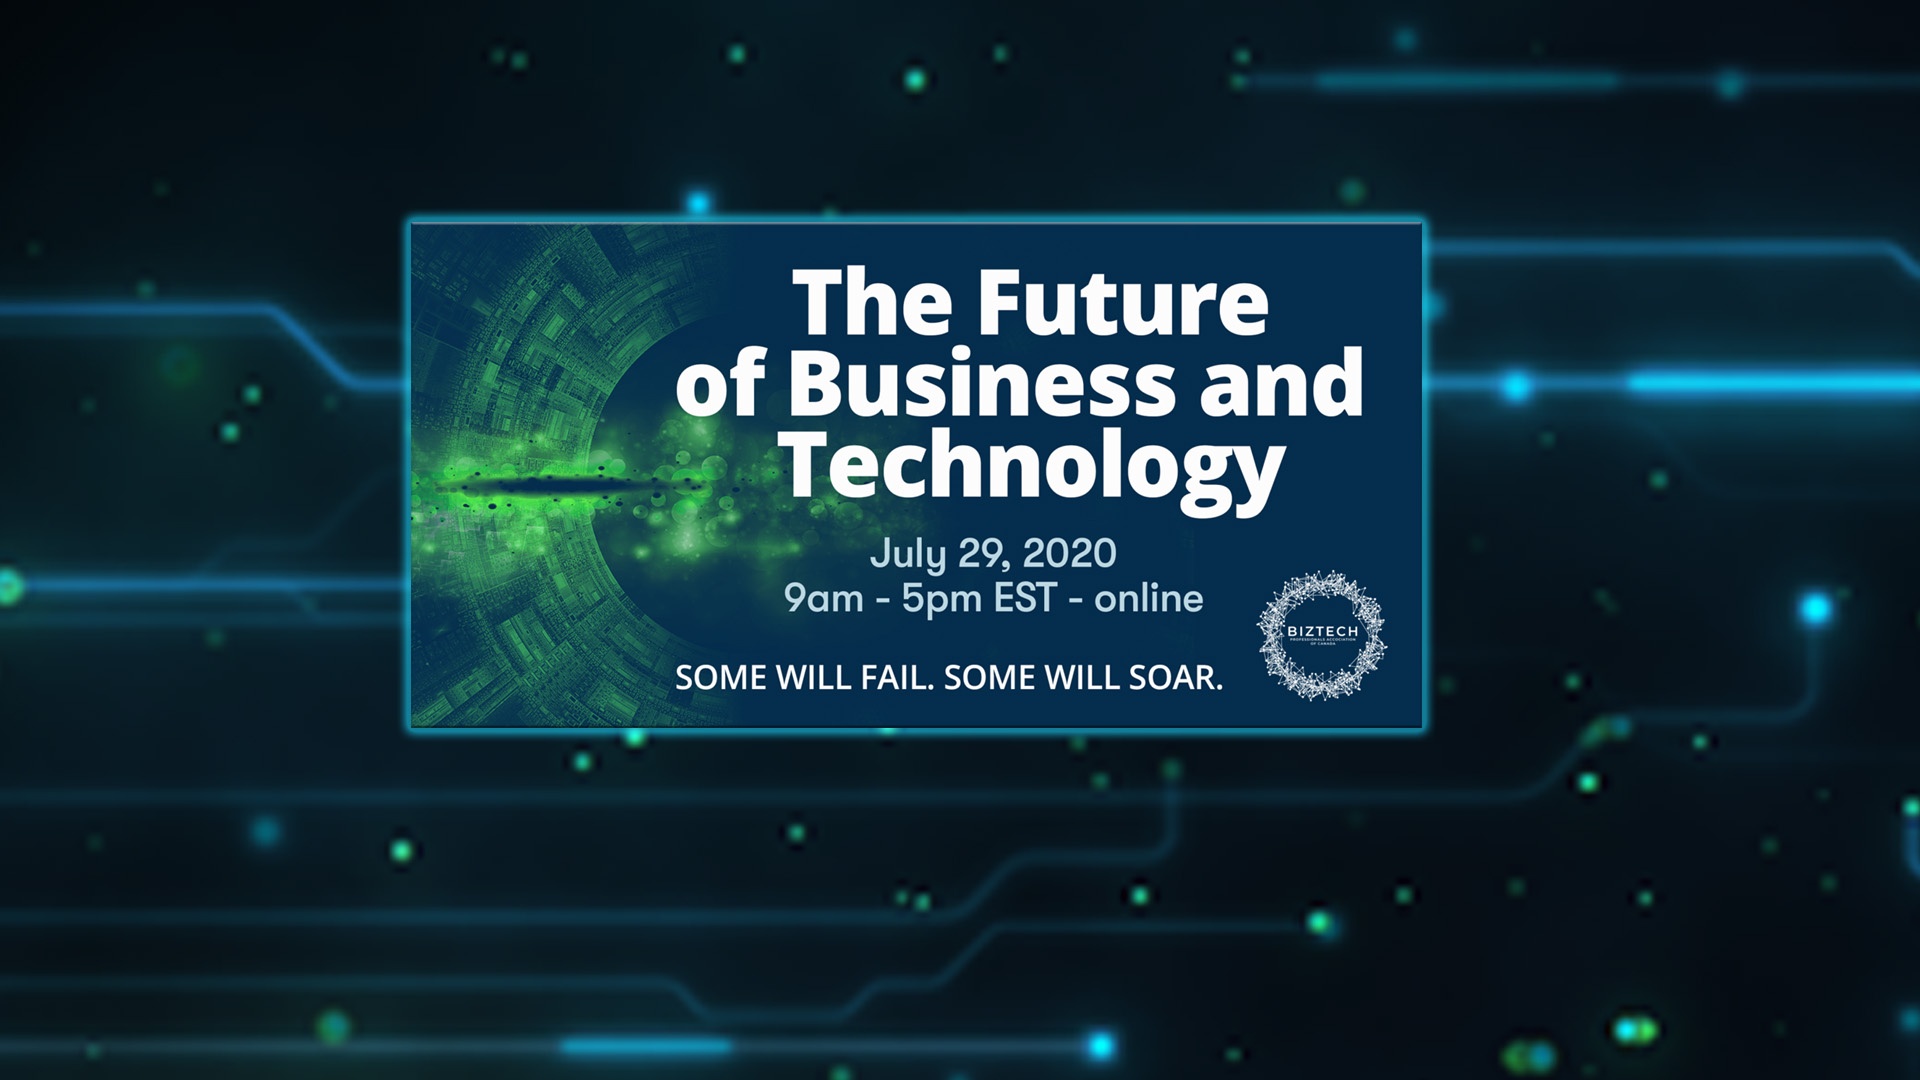 The Future of Business and Technology